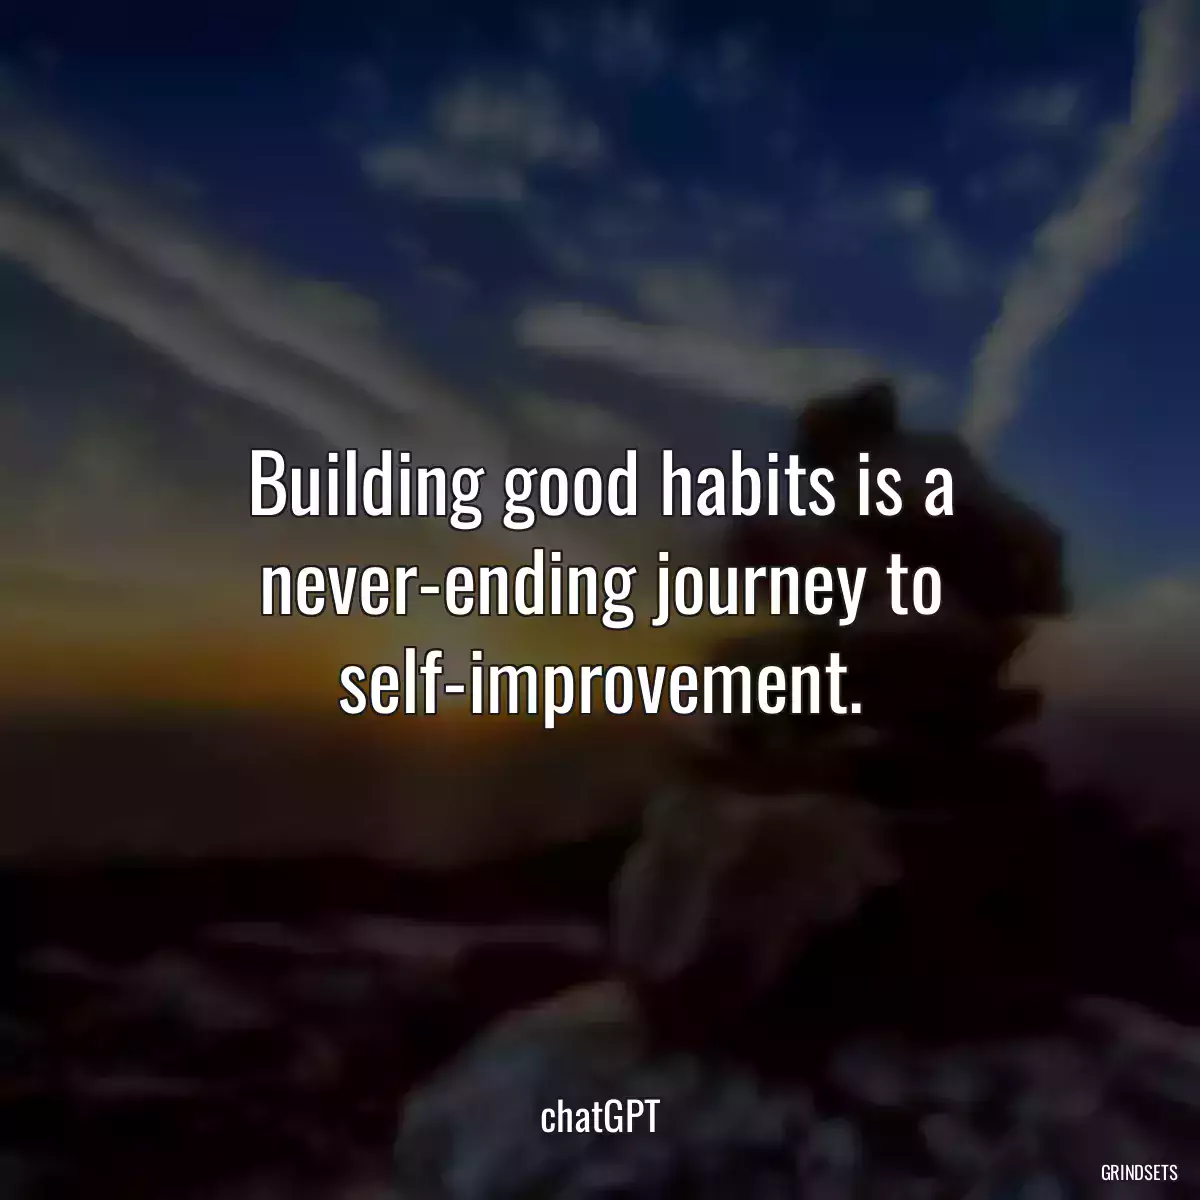 Building good habits is a never-ending journey to self-improvement.